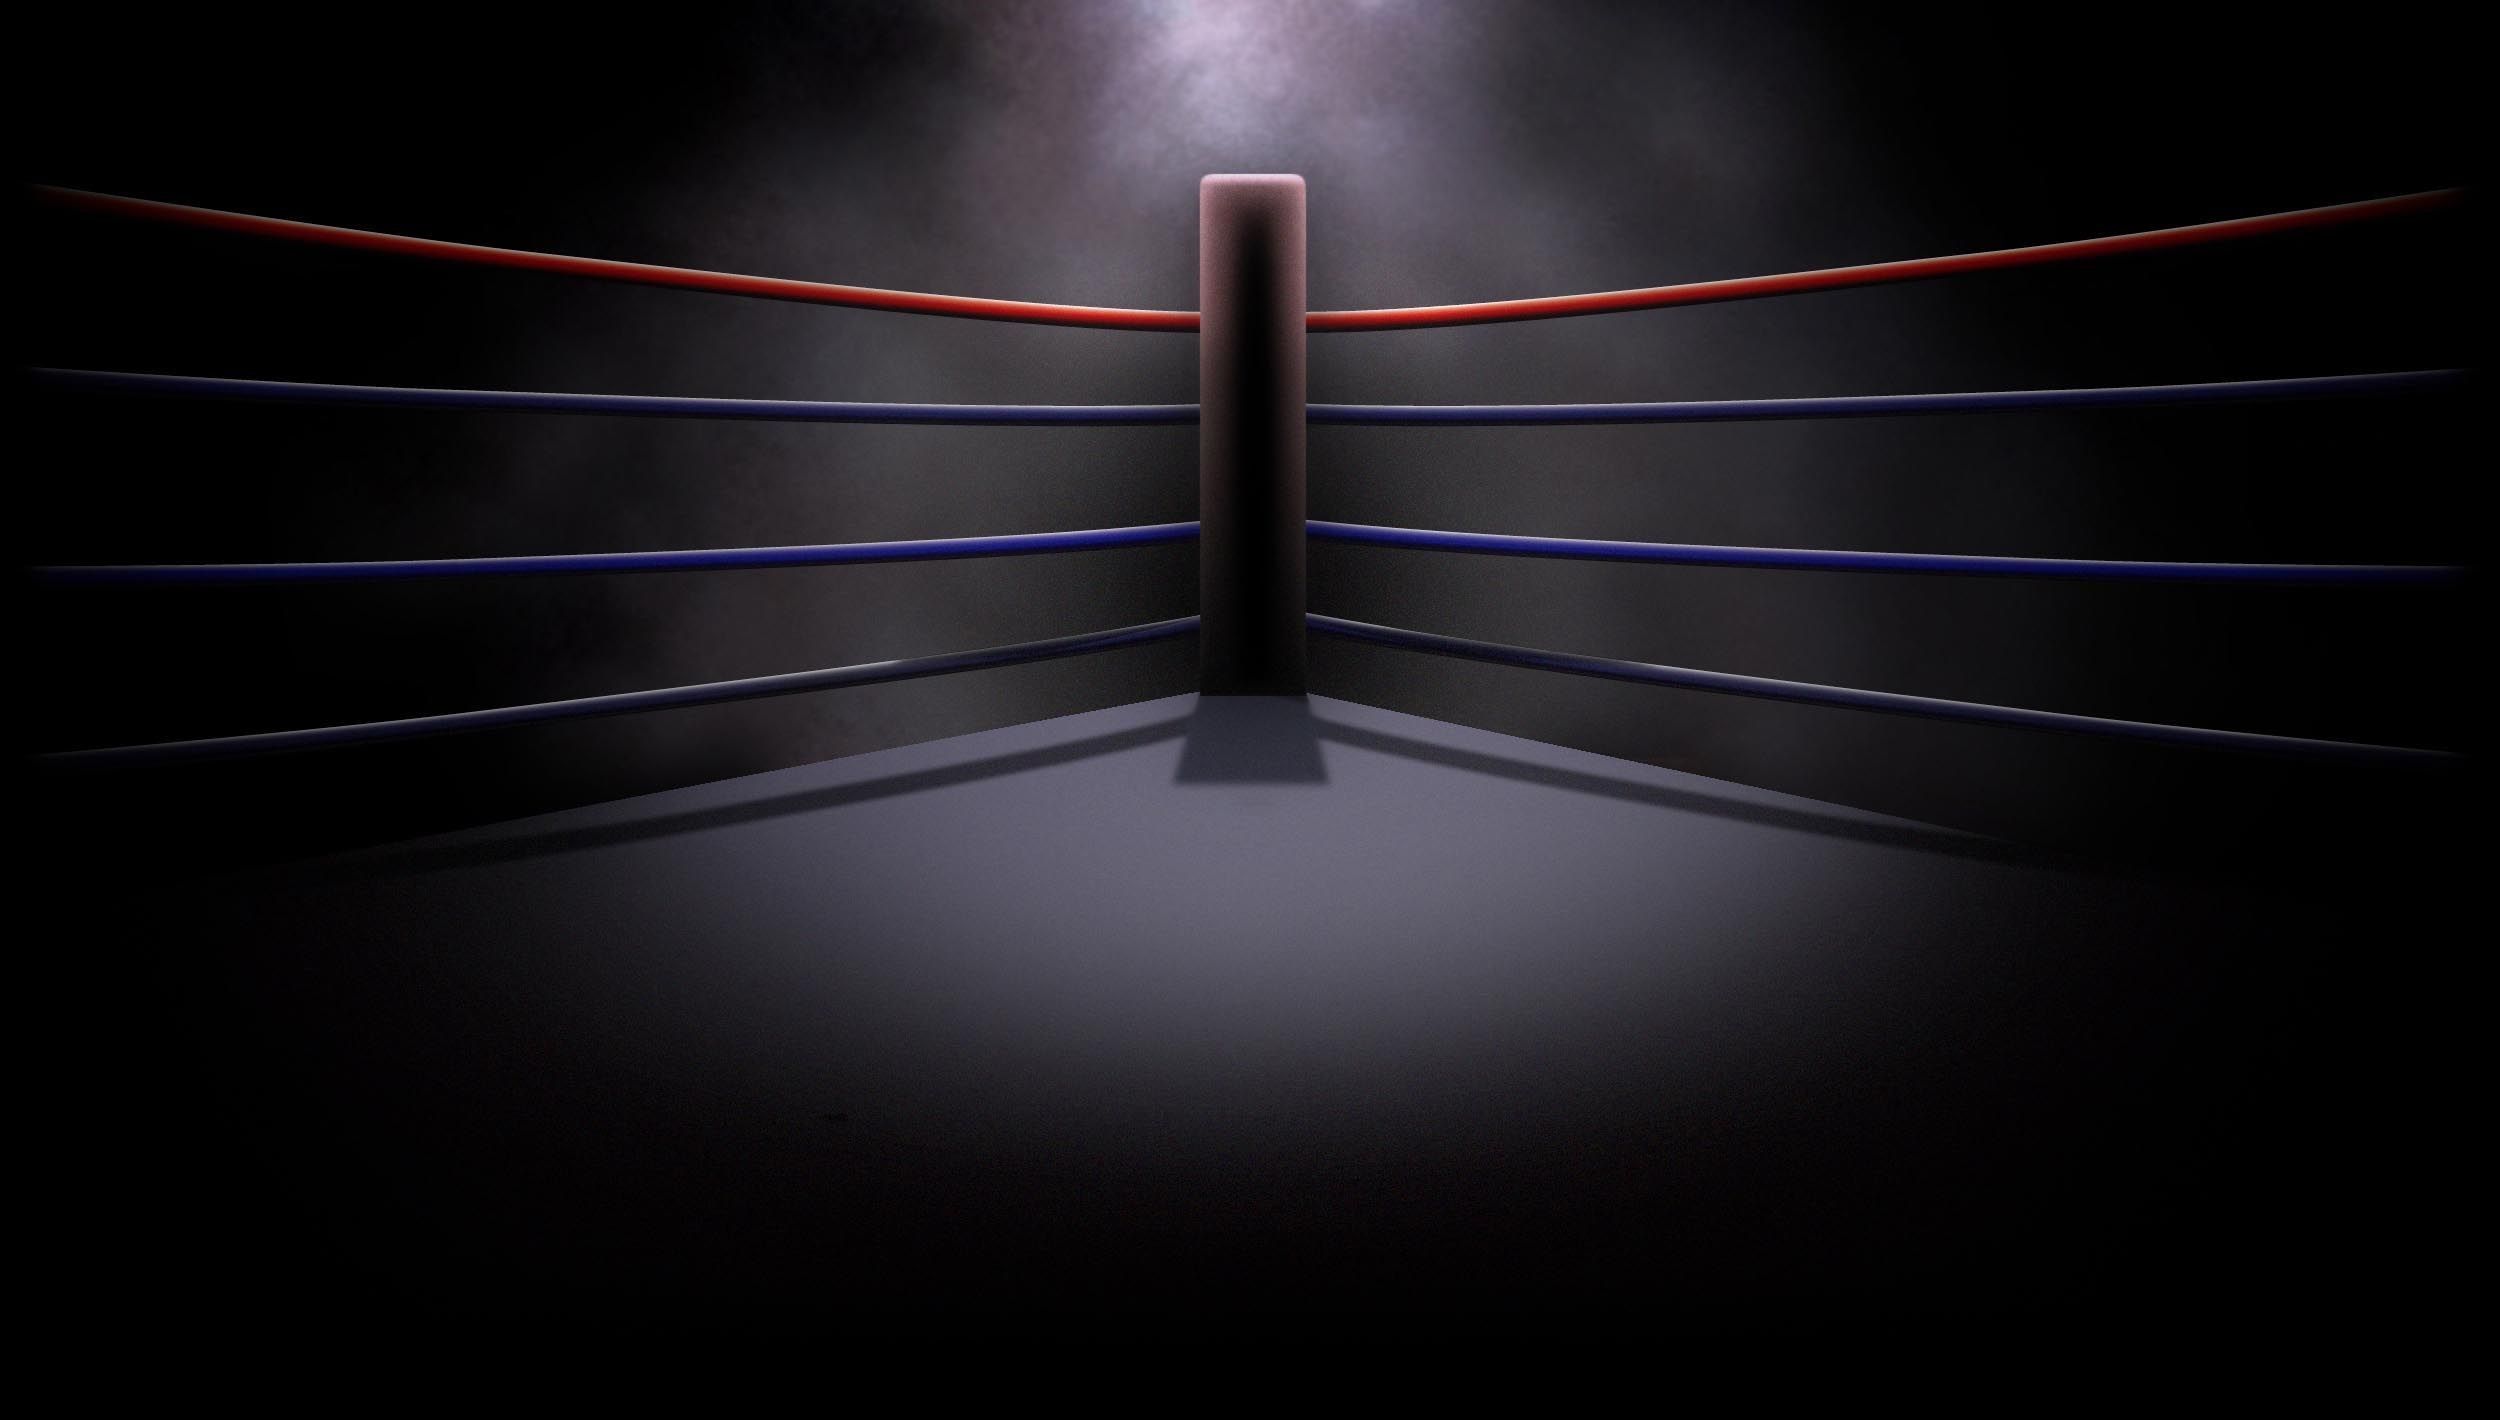 Boxing Ring Wallpapers